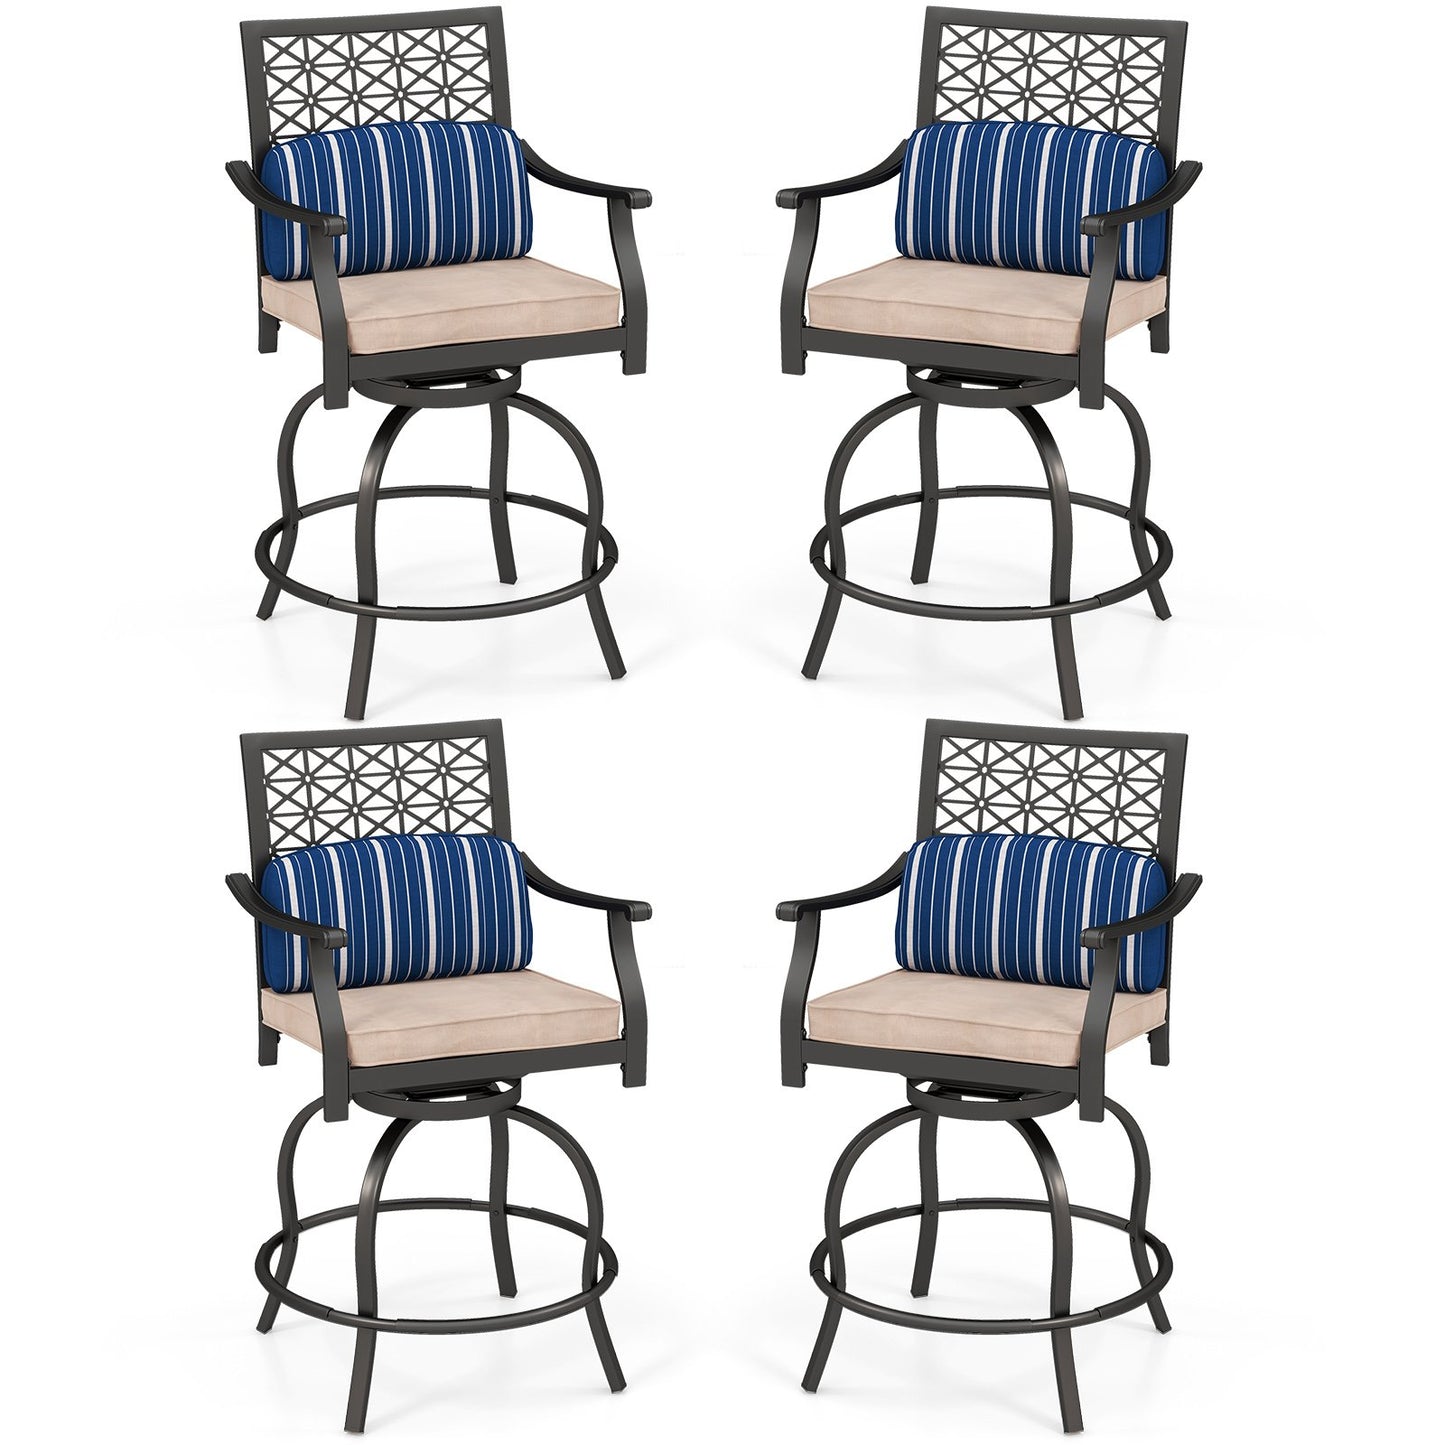 Set of 2 Outdoor Bar Height Chair with Soft Cushions, Black